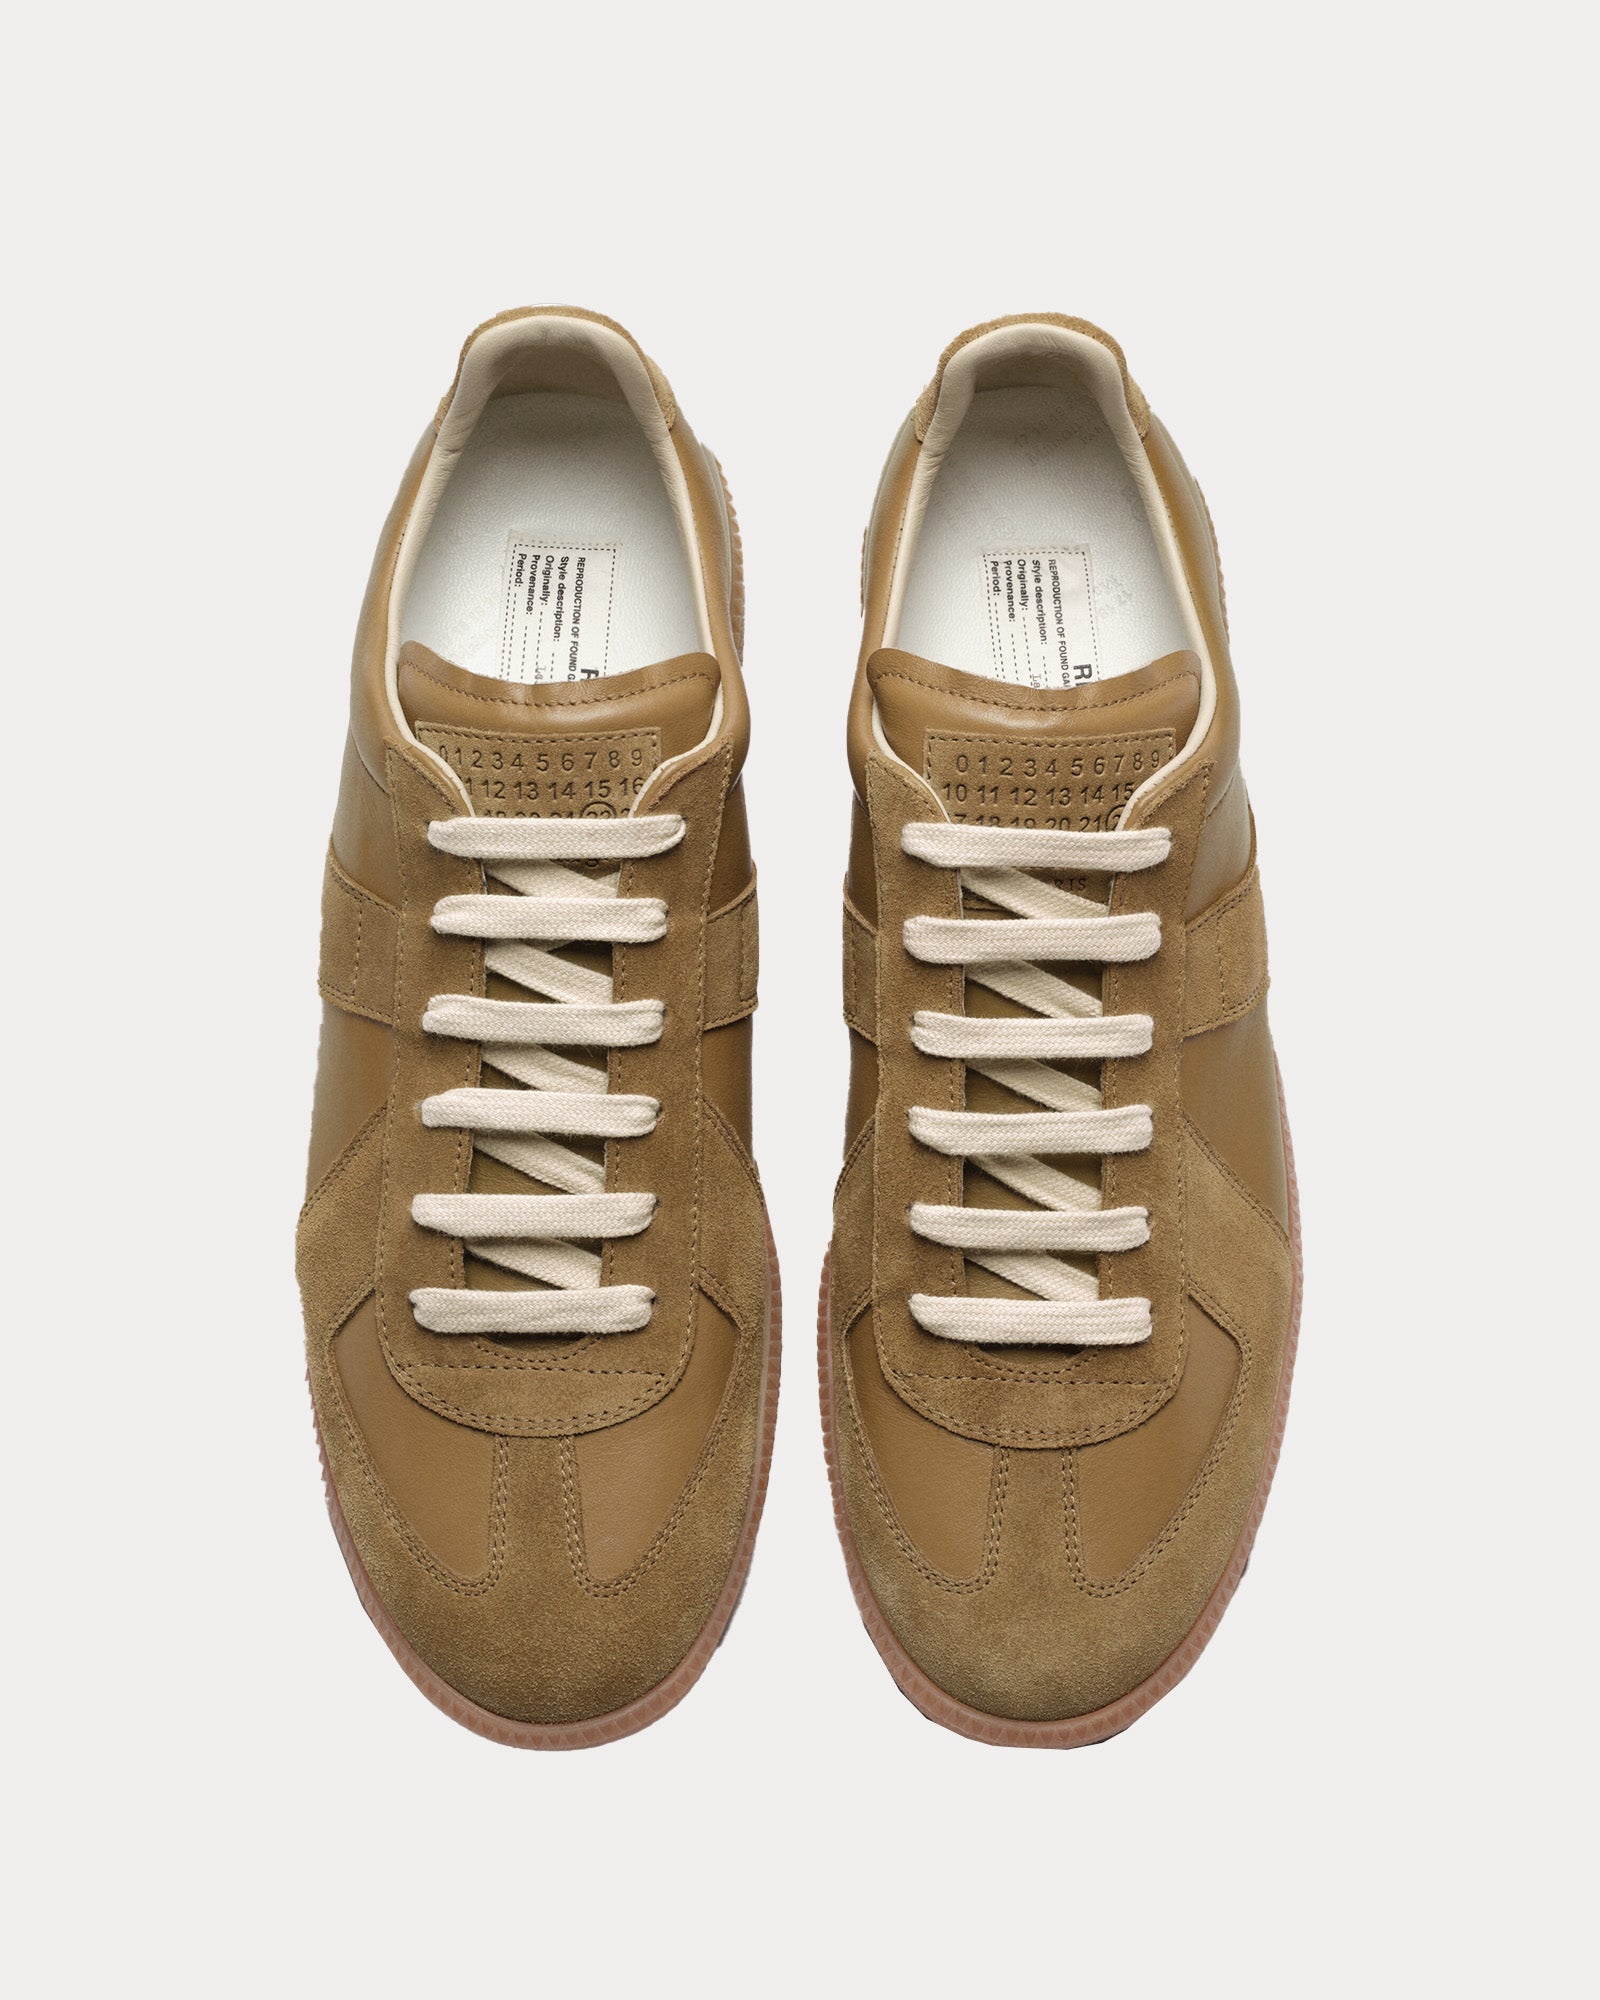 Maison Margiela - Replica Leather Swamp Low Top Sneakers